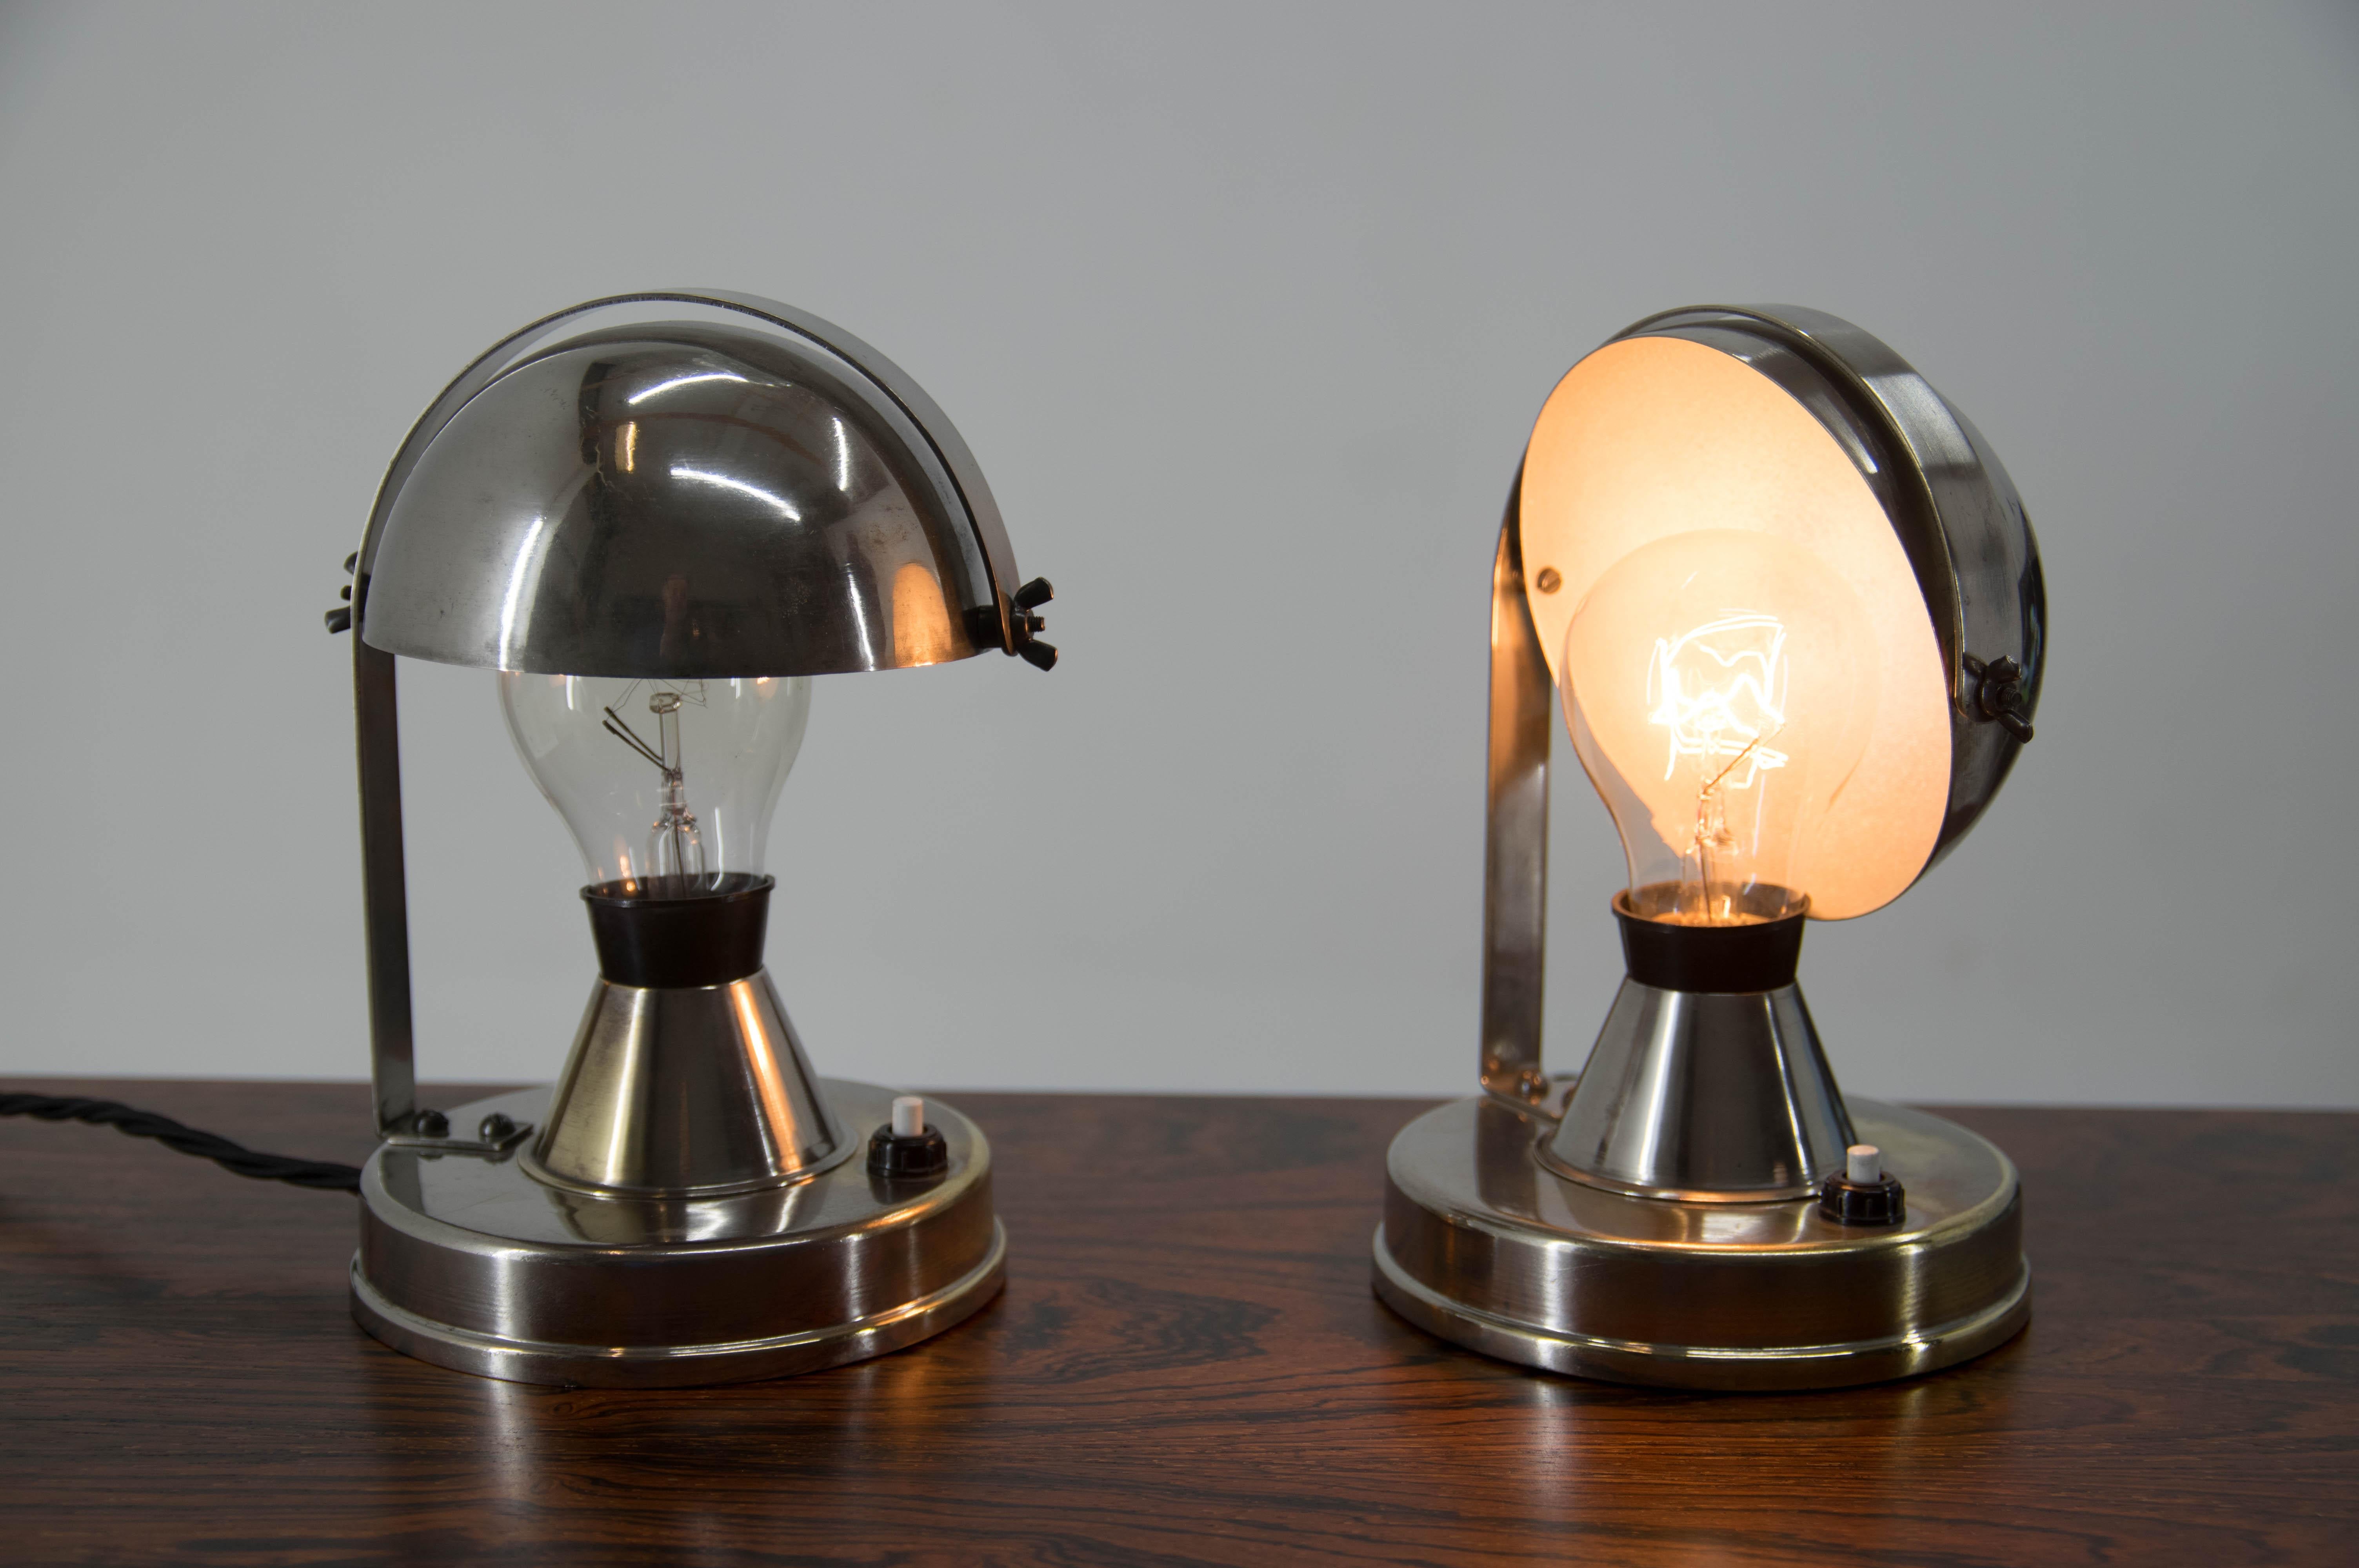 Beautiful rare table lamps with flexible shades. Designed by Franta Anyz for IAS.
Restored: original nickel polished, rewired - 1x40W, E25-E27 bulb
US plug adapter included.